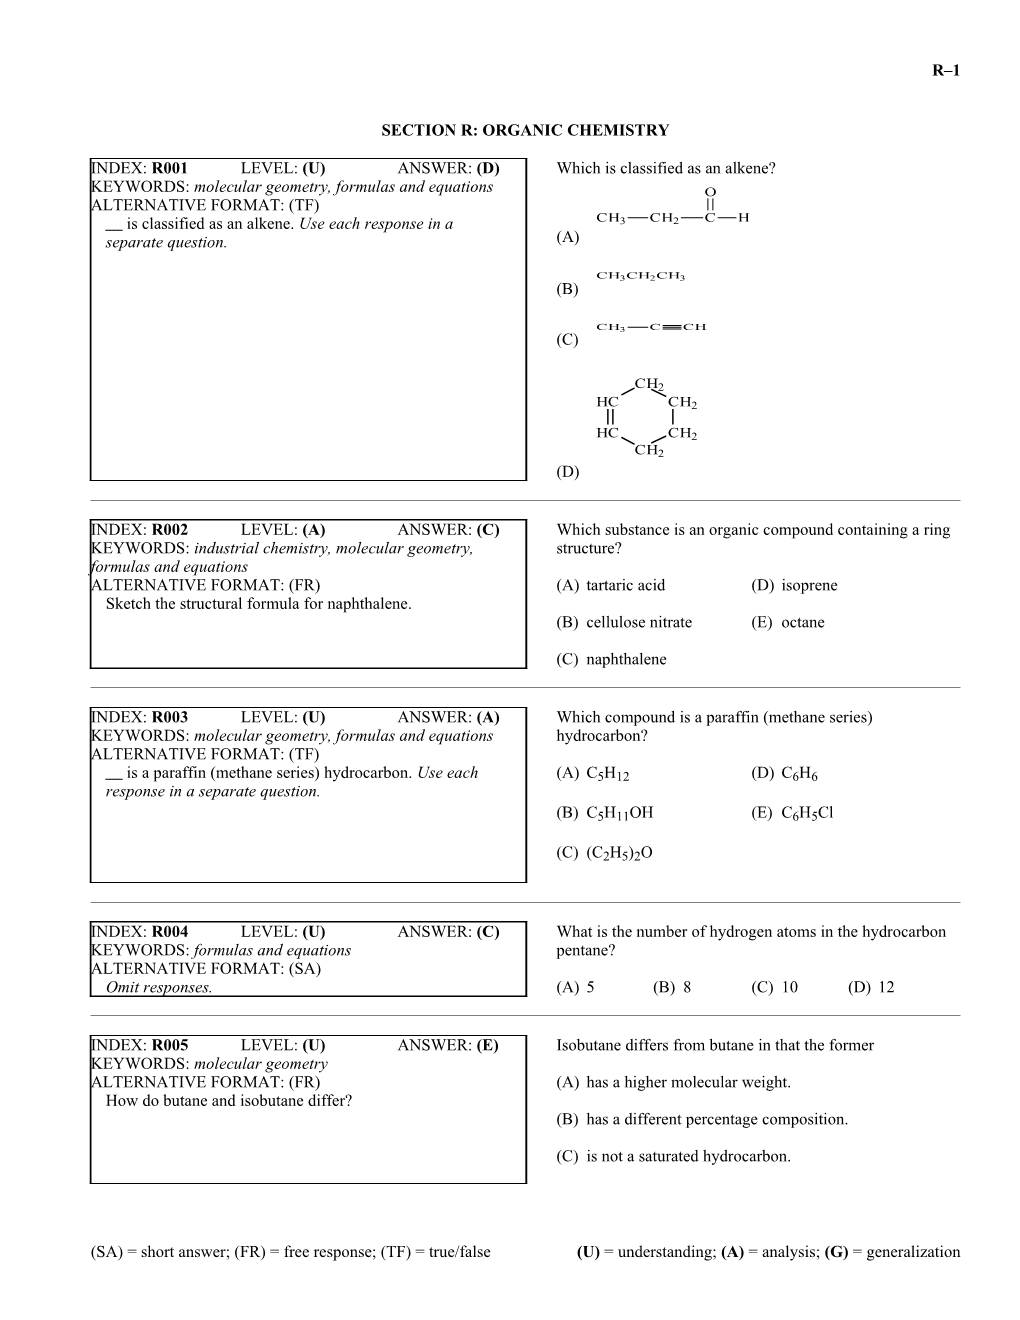 Section R: Organic Chemistry